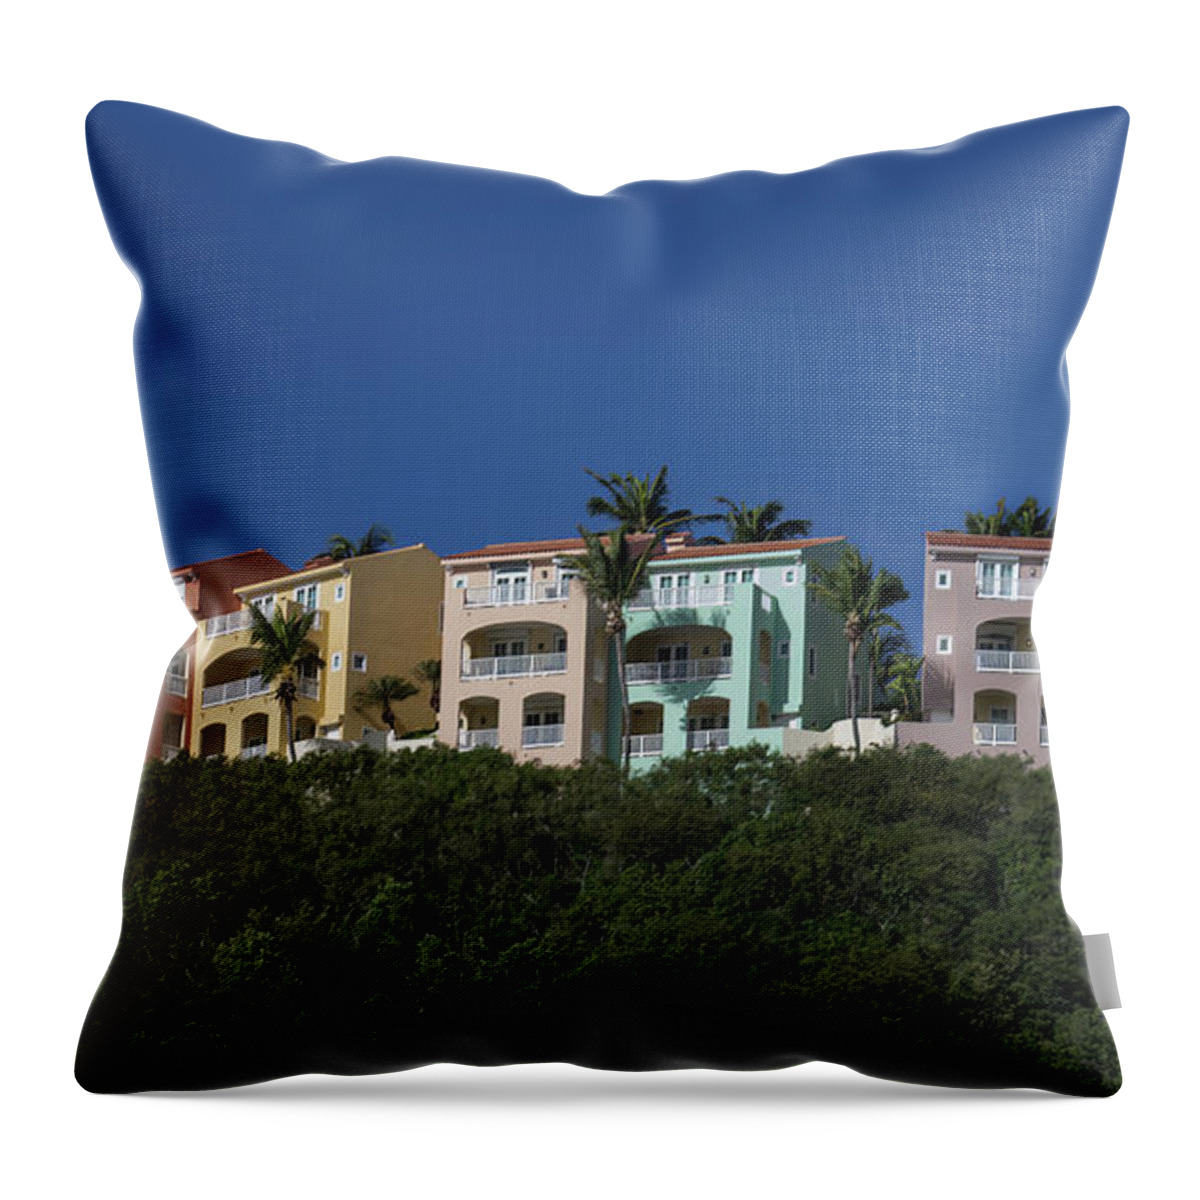 Homes Throw Pillow featuring the photograph Homes on the Hill by Roberta Byram